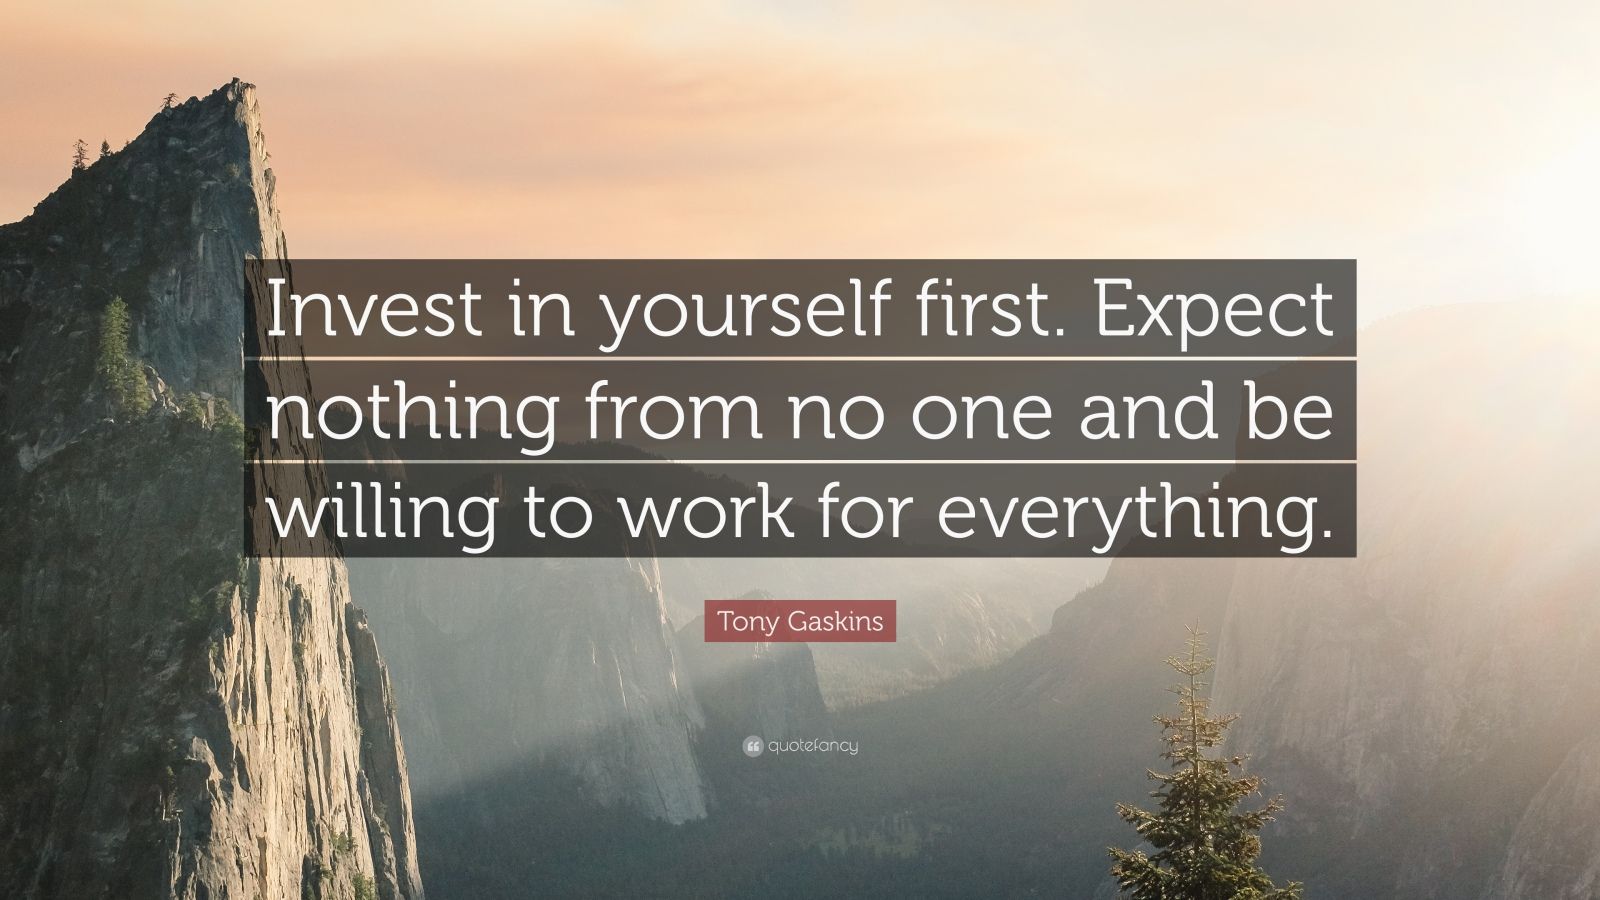 Tony Gaskins Quote: “Invest in yourself first. Expect nothing from no